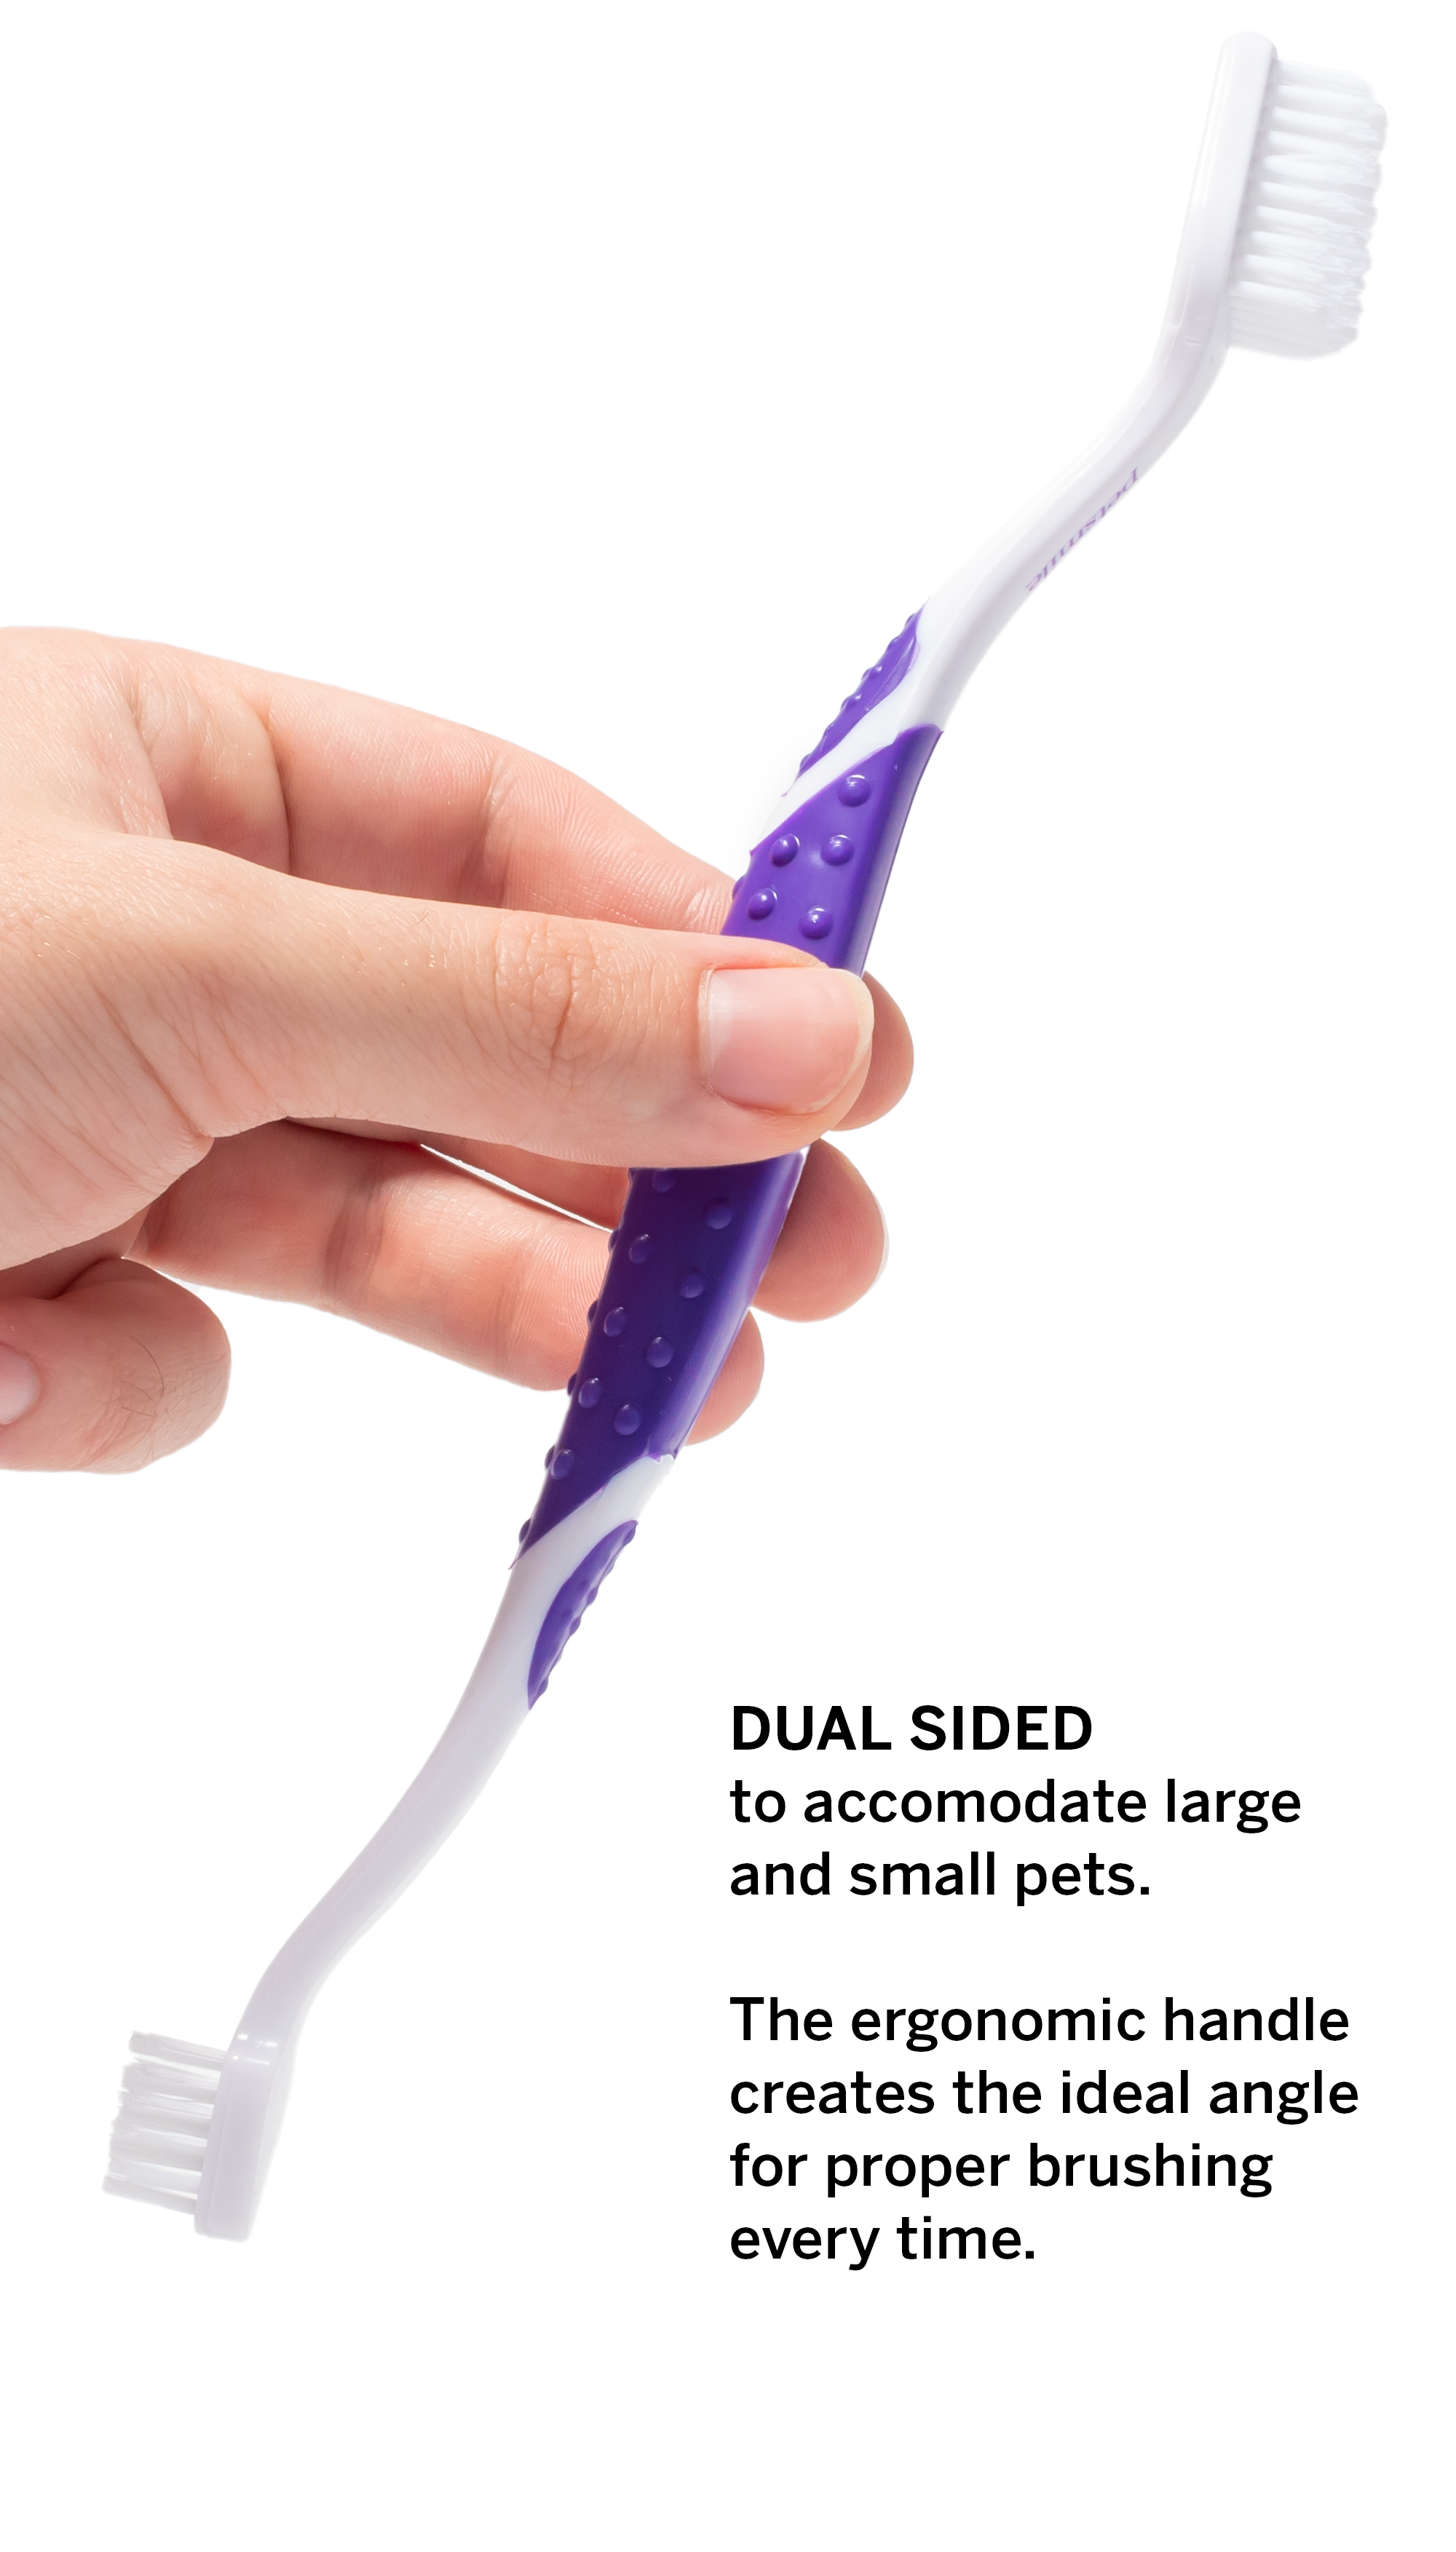 Dual-sided brush cleans teeth and gums , Purple toothbrush with 45-degree angle , petmsile toothbrush removes bacteria from cat's mouth , Eliminates bacteria with angled bristles , Advanced cat dental tool